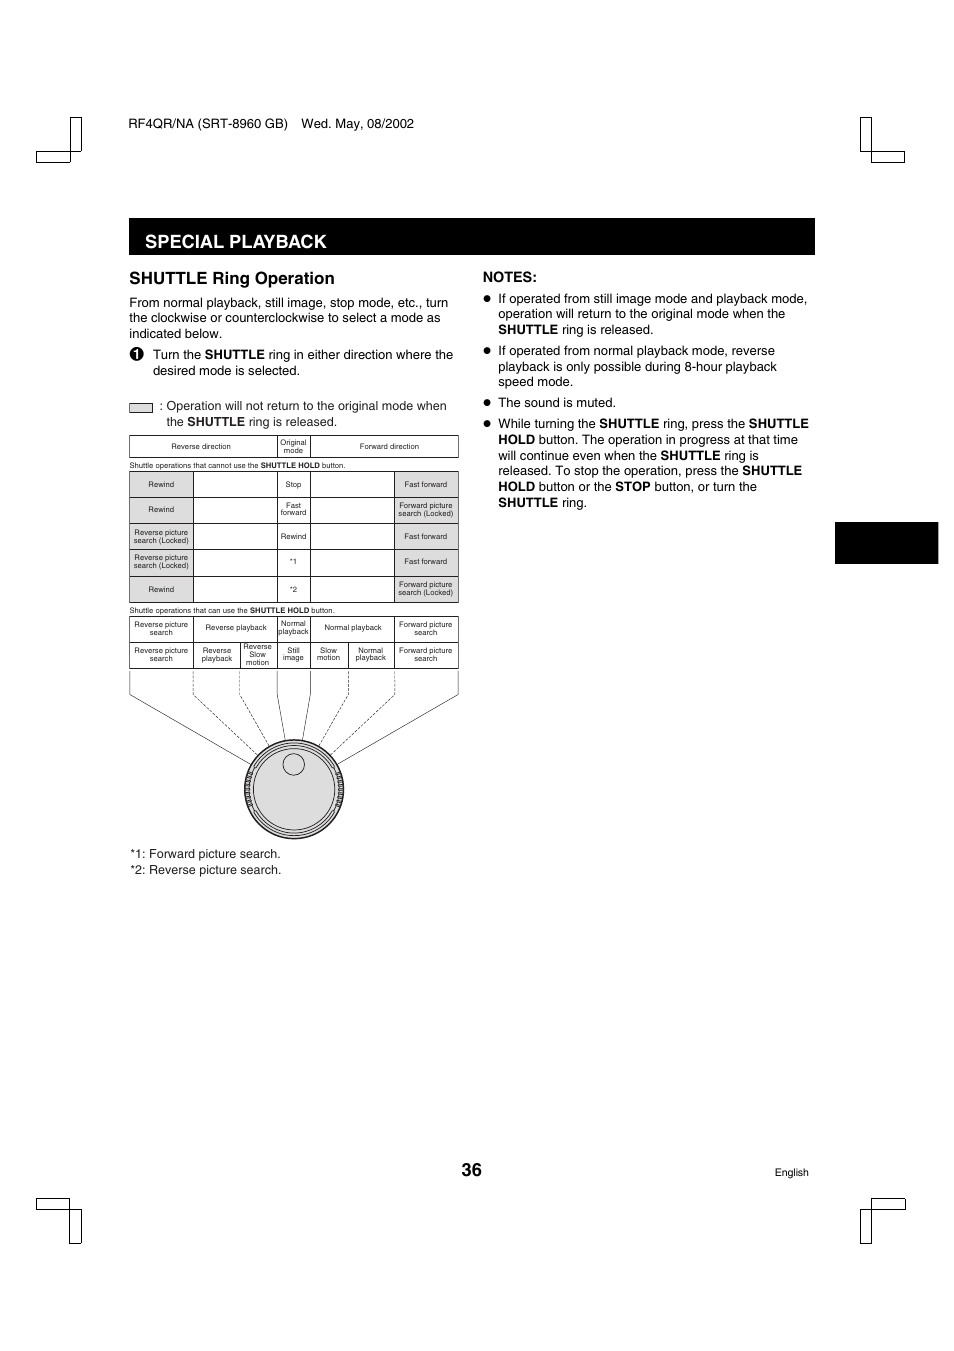 Special playback, Shuttle ring operation | Sharp SRT-8040 User Manual | Page 37 / 56